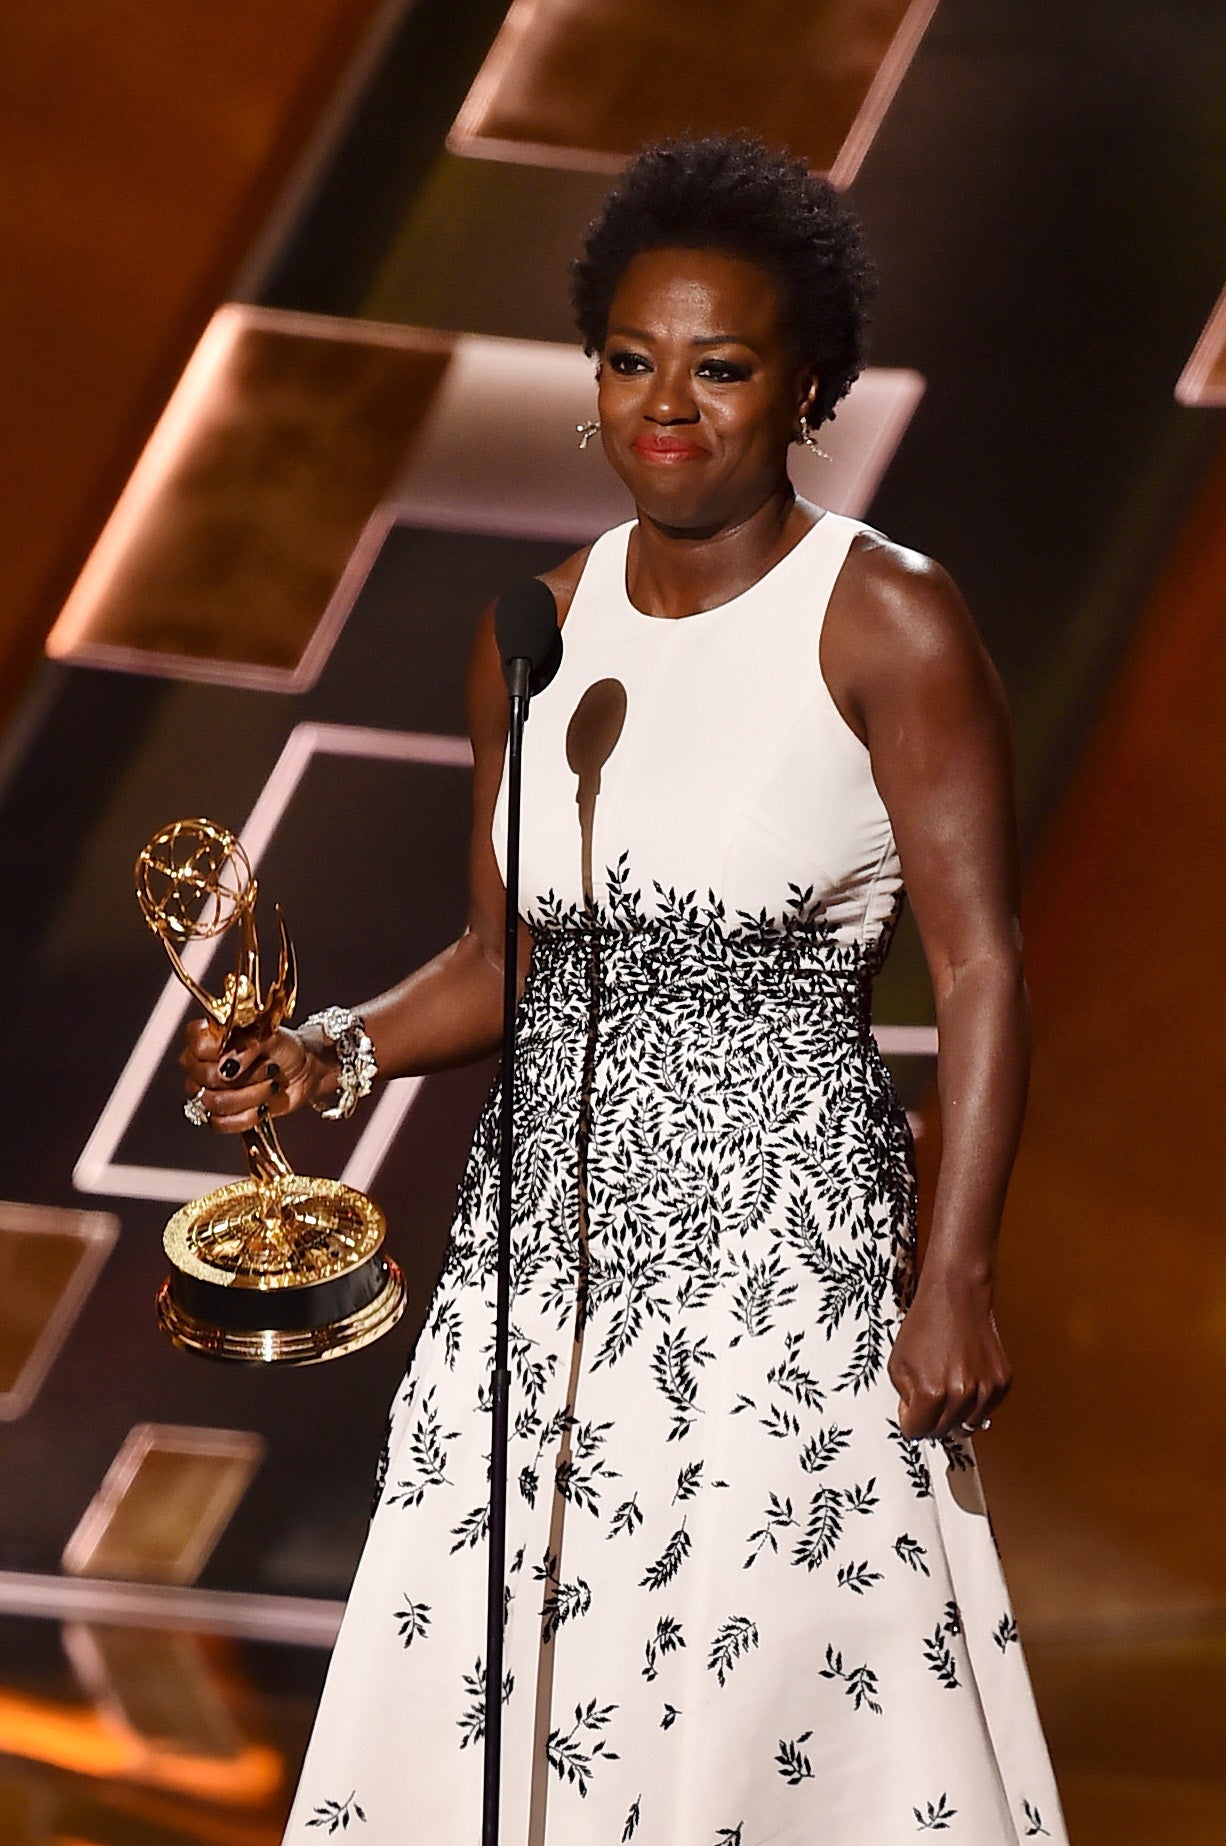 What Was Your Favorite Black Girl Magic Moment from the Emmys?